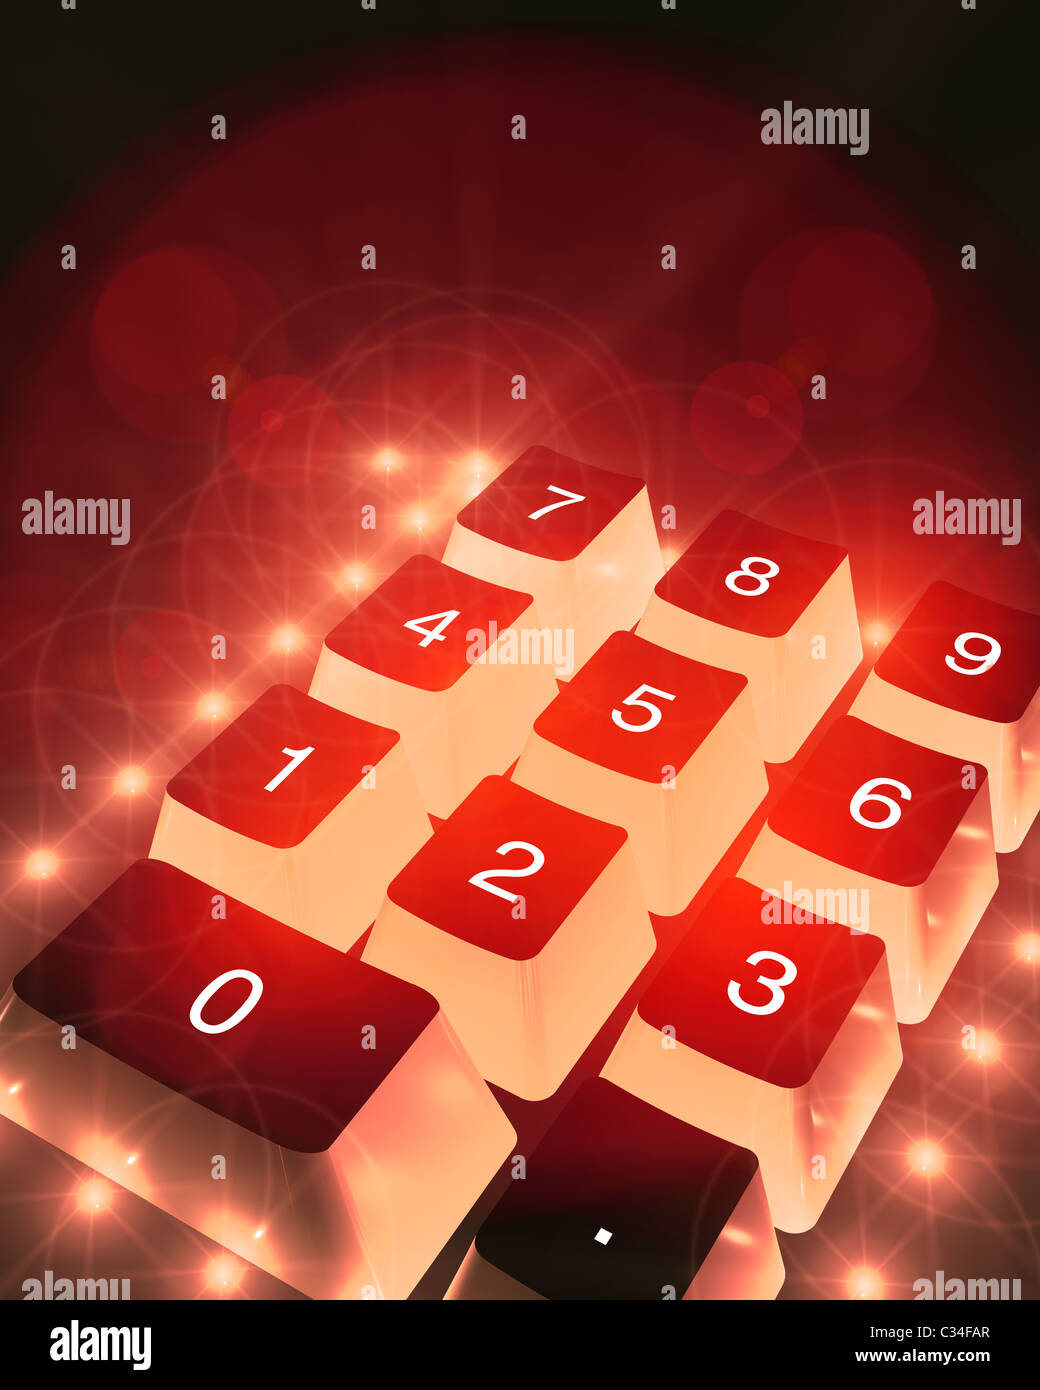 HOT KEYPAD NUMBER NUMBERS KEYS KEYBOARD TECHNOLOGY LETTERS Stock Photo